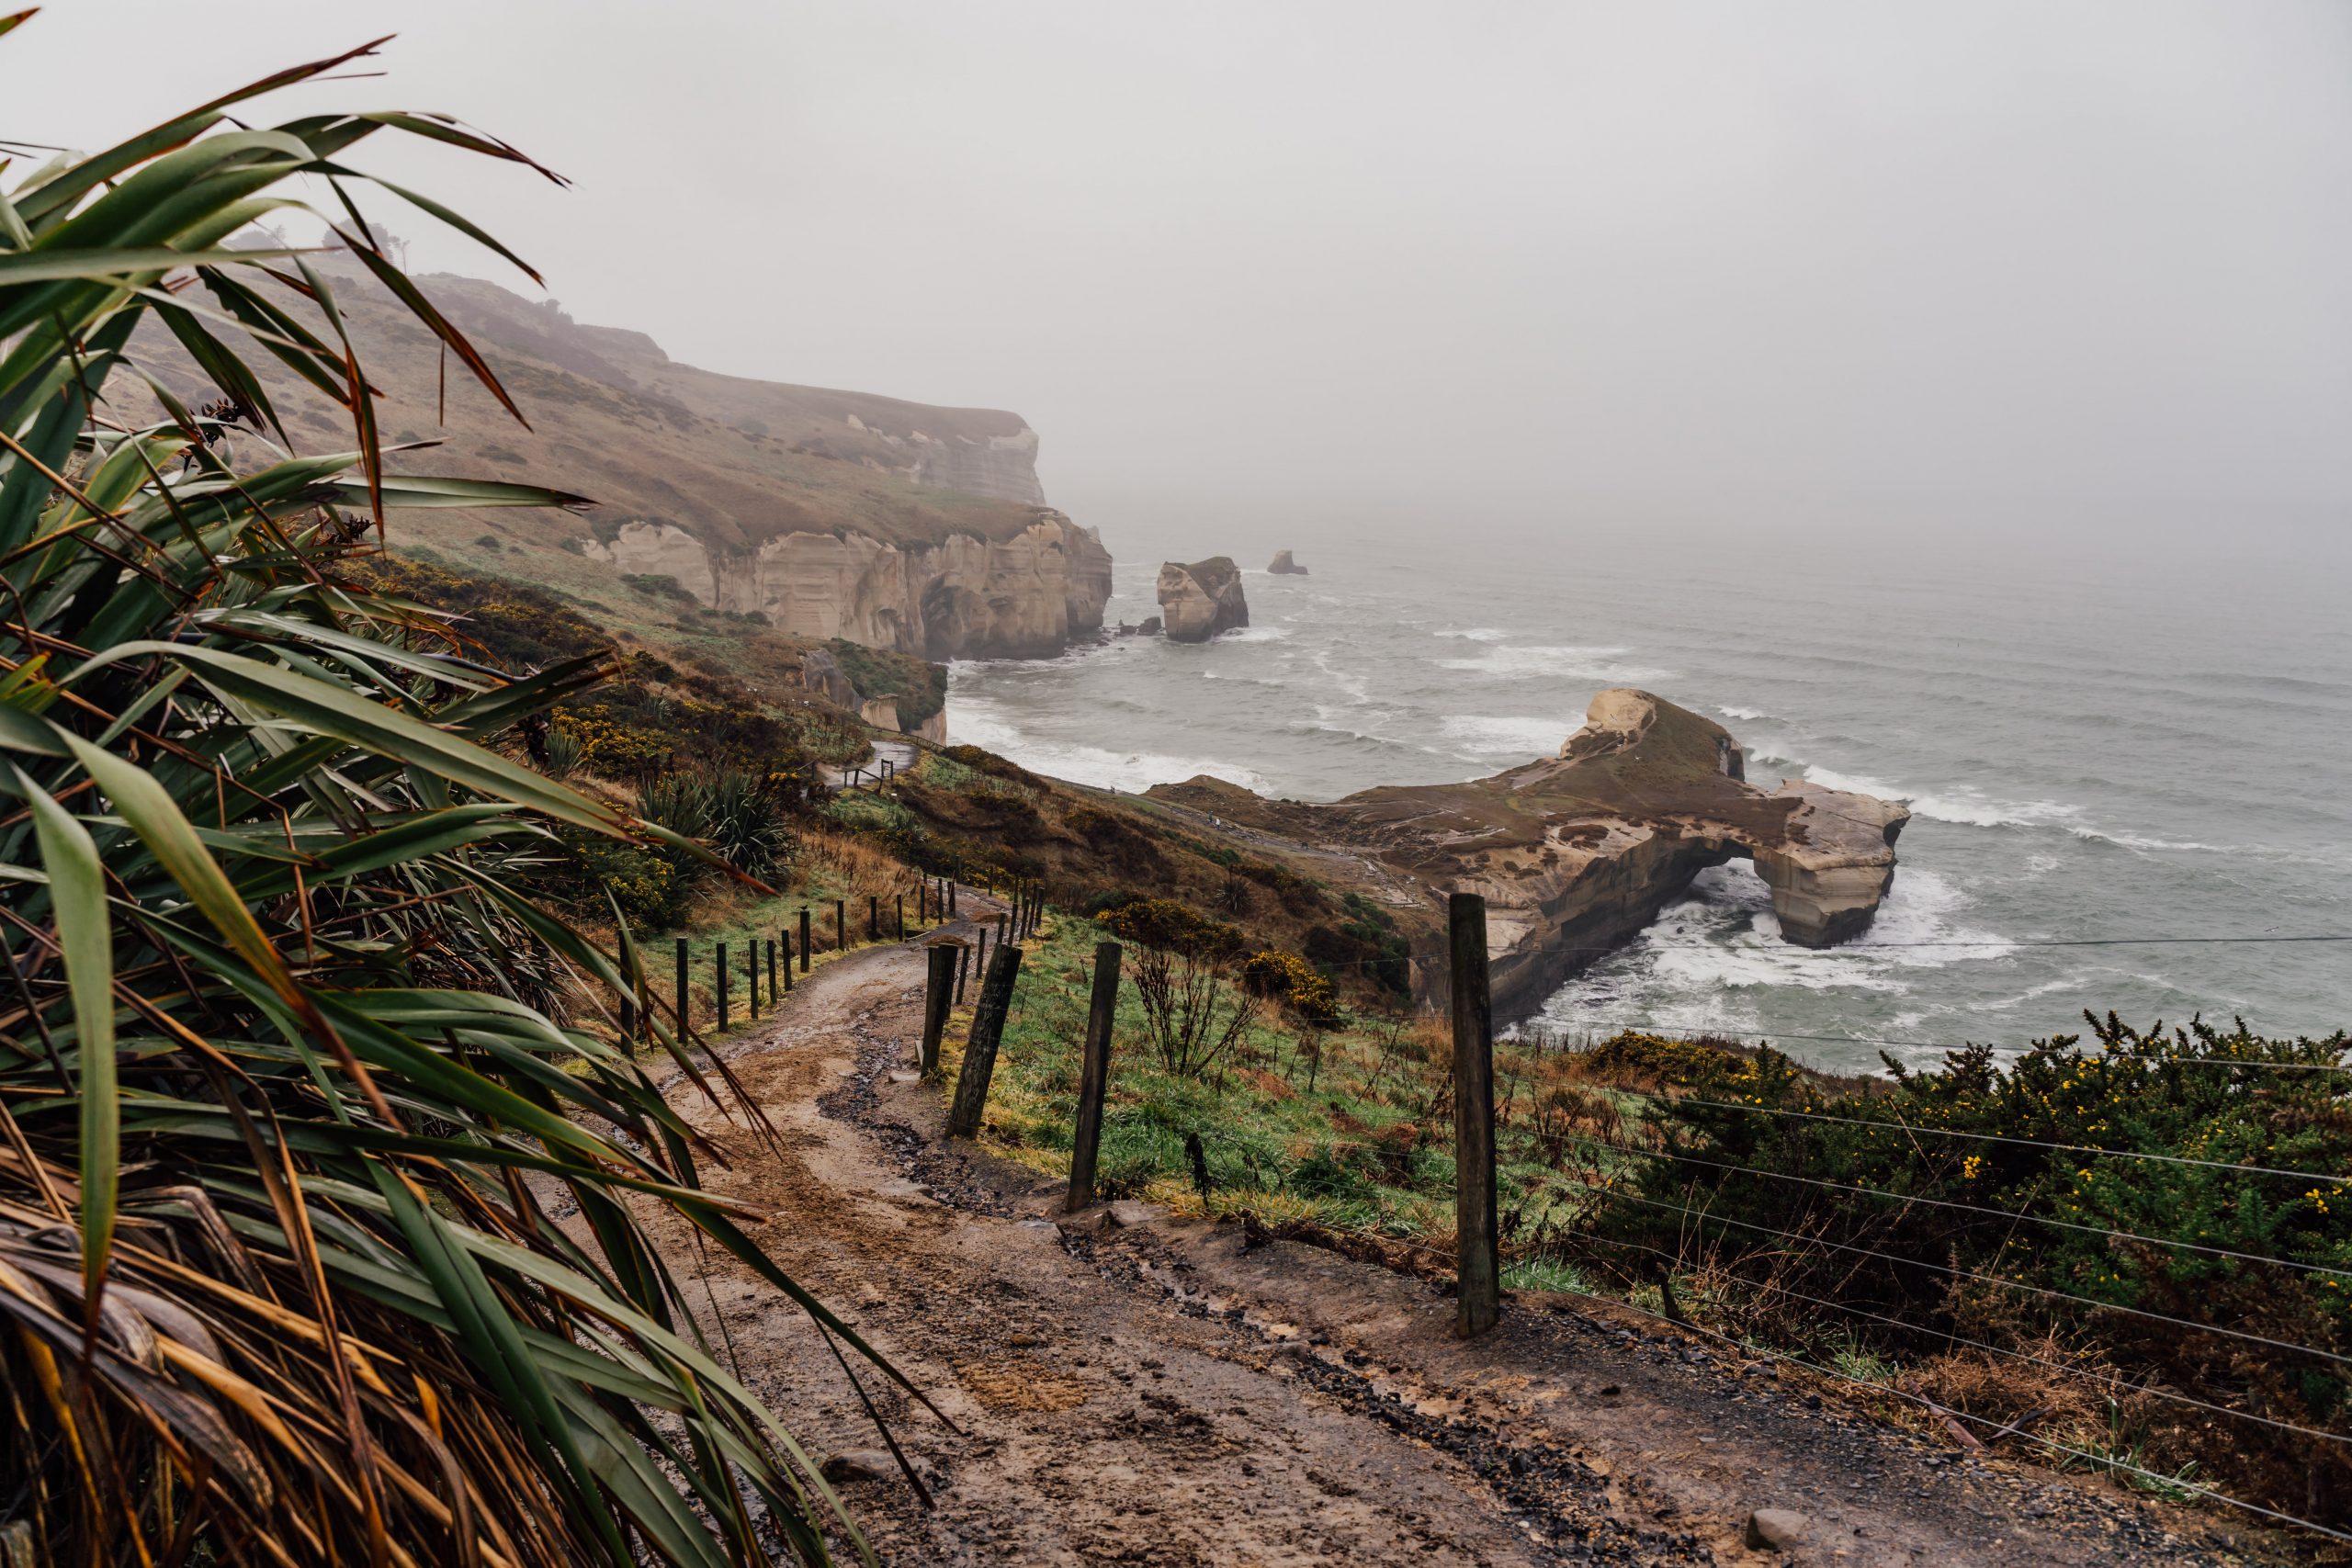 A muddy path leading downhill to a misty bay with a natural rocky arch stretching into the boisterous ocean.